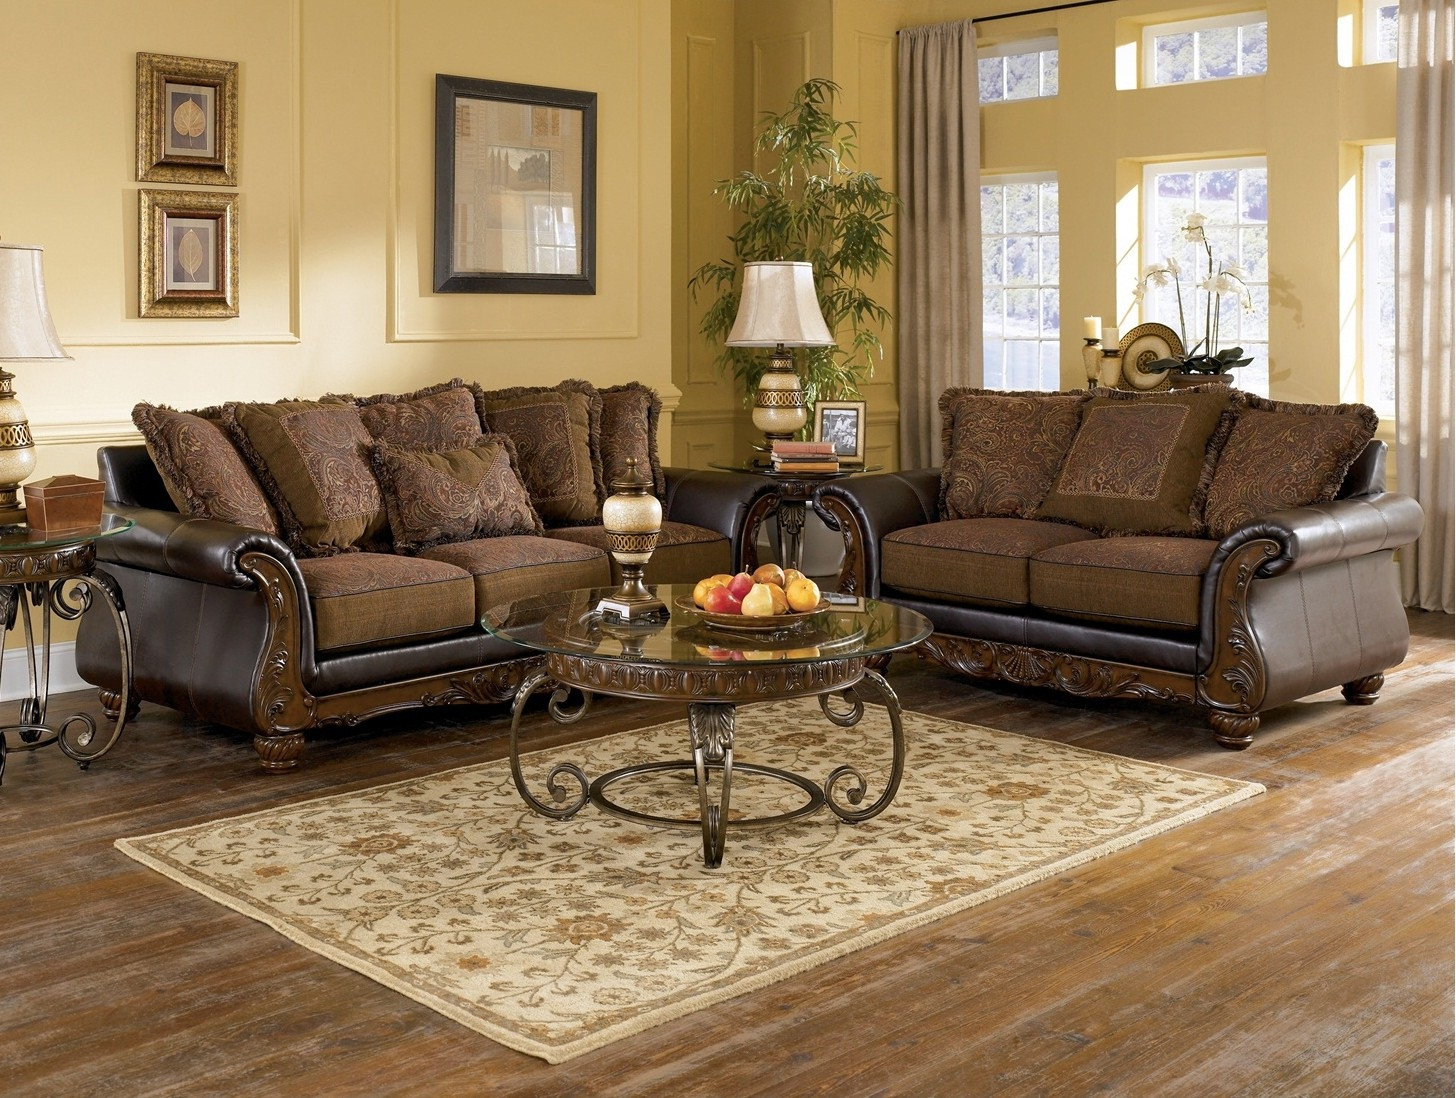 Inexpensive Living Room Chair
 Cheap Living Room Sets Under $500